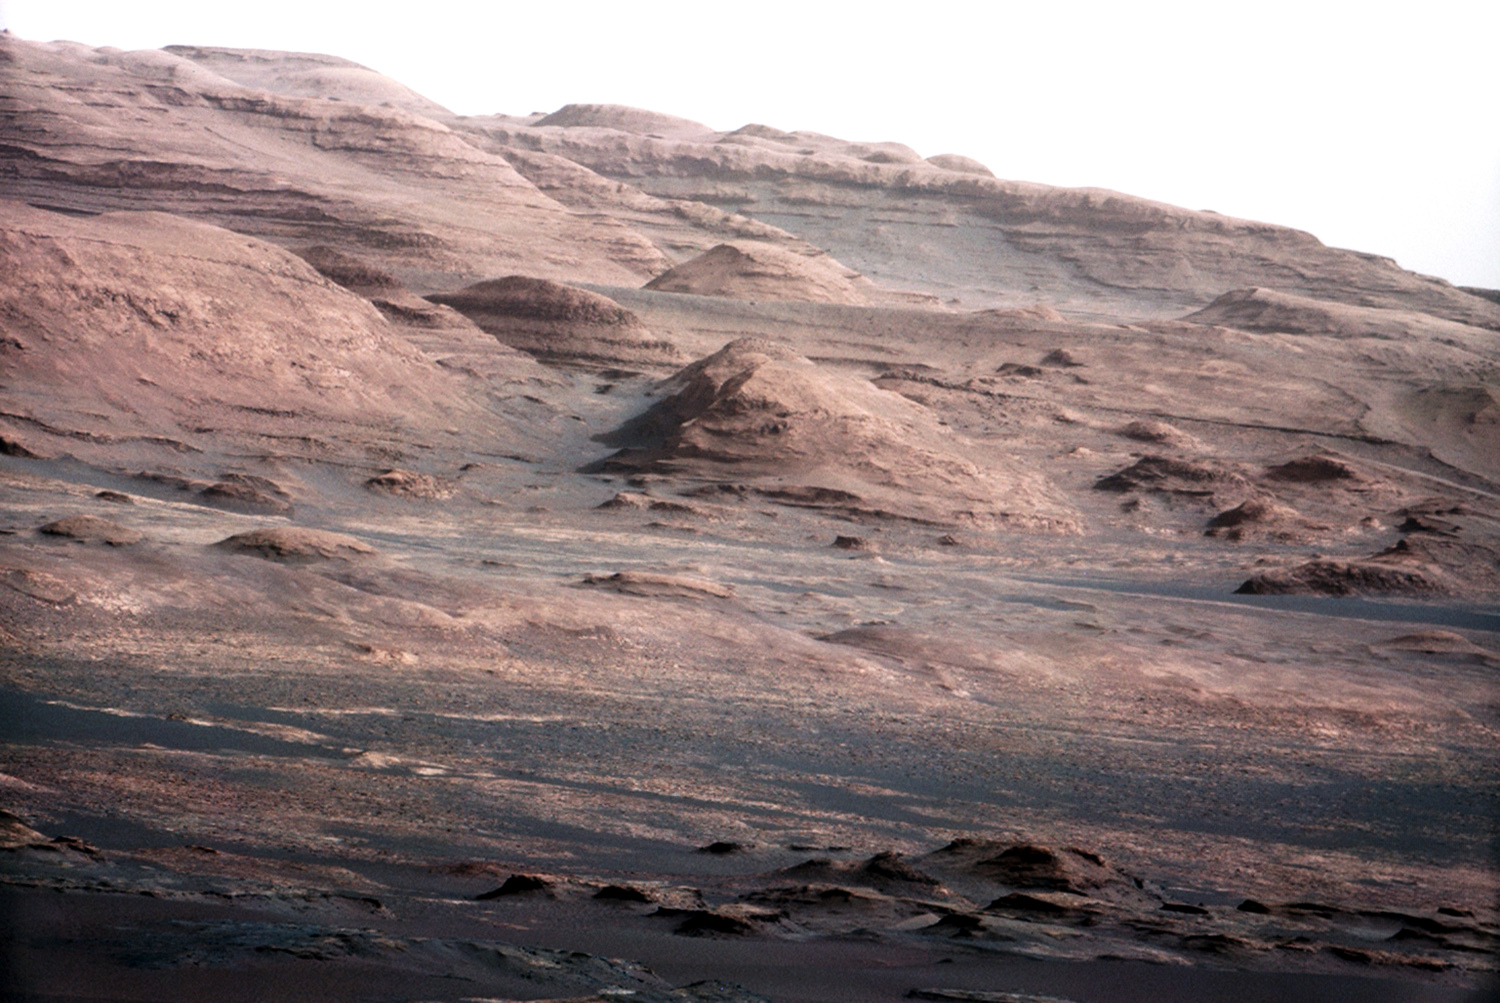 Image from Nasa's Curiosity rover showing the base of Mount Sharp on Mars. Photo: AP